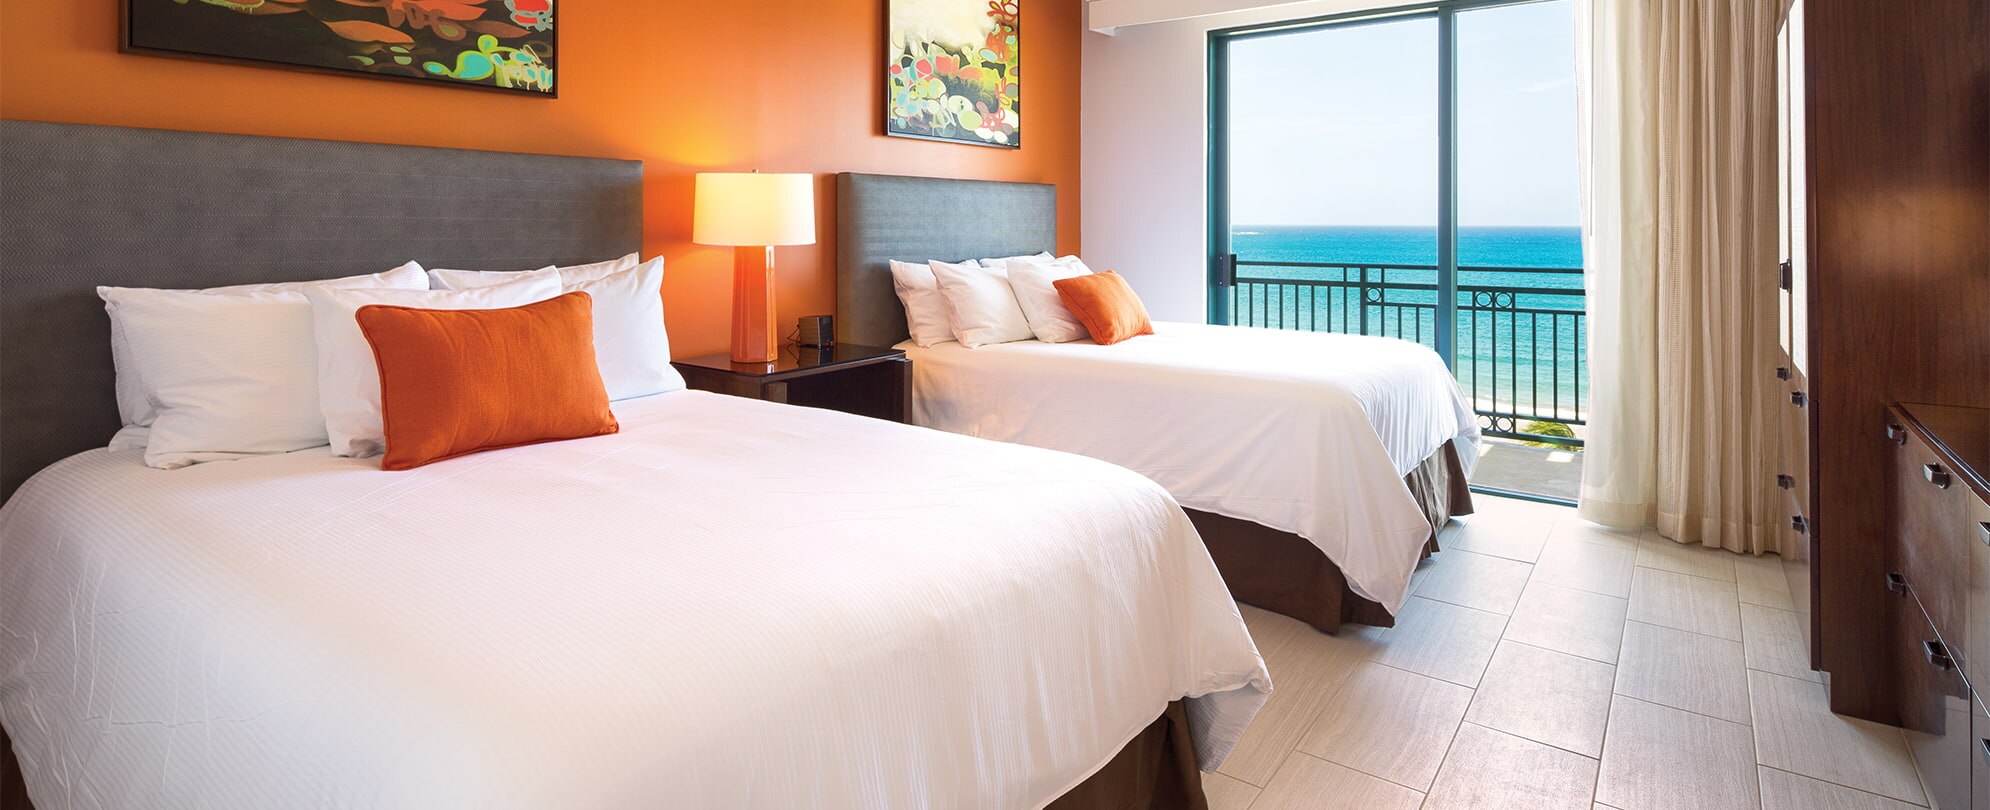 Double beds in a room with ocean view in a Presidential Reserve suite at Margaritaville Vacation Club resort in Rio Mar.